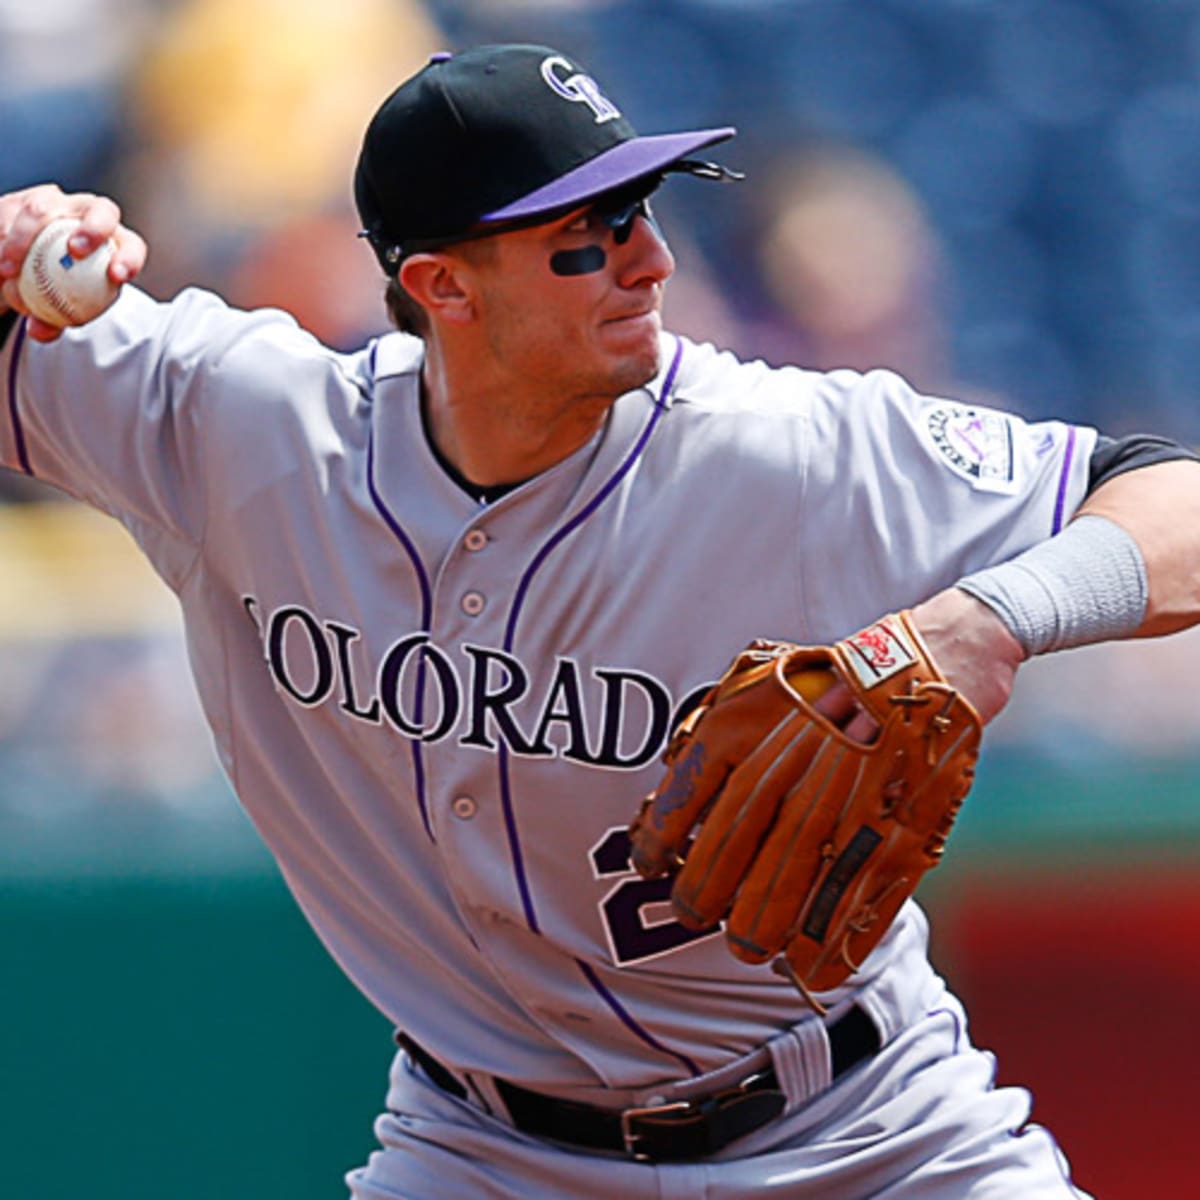 Rockies lose to Braves in extra innings, again, after Jhoulys